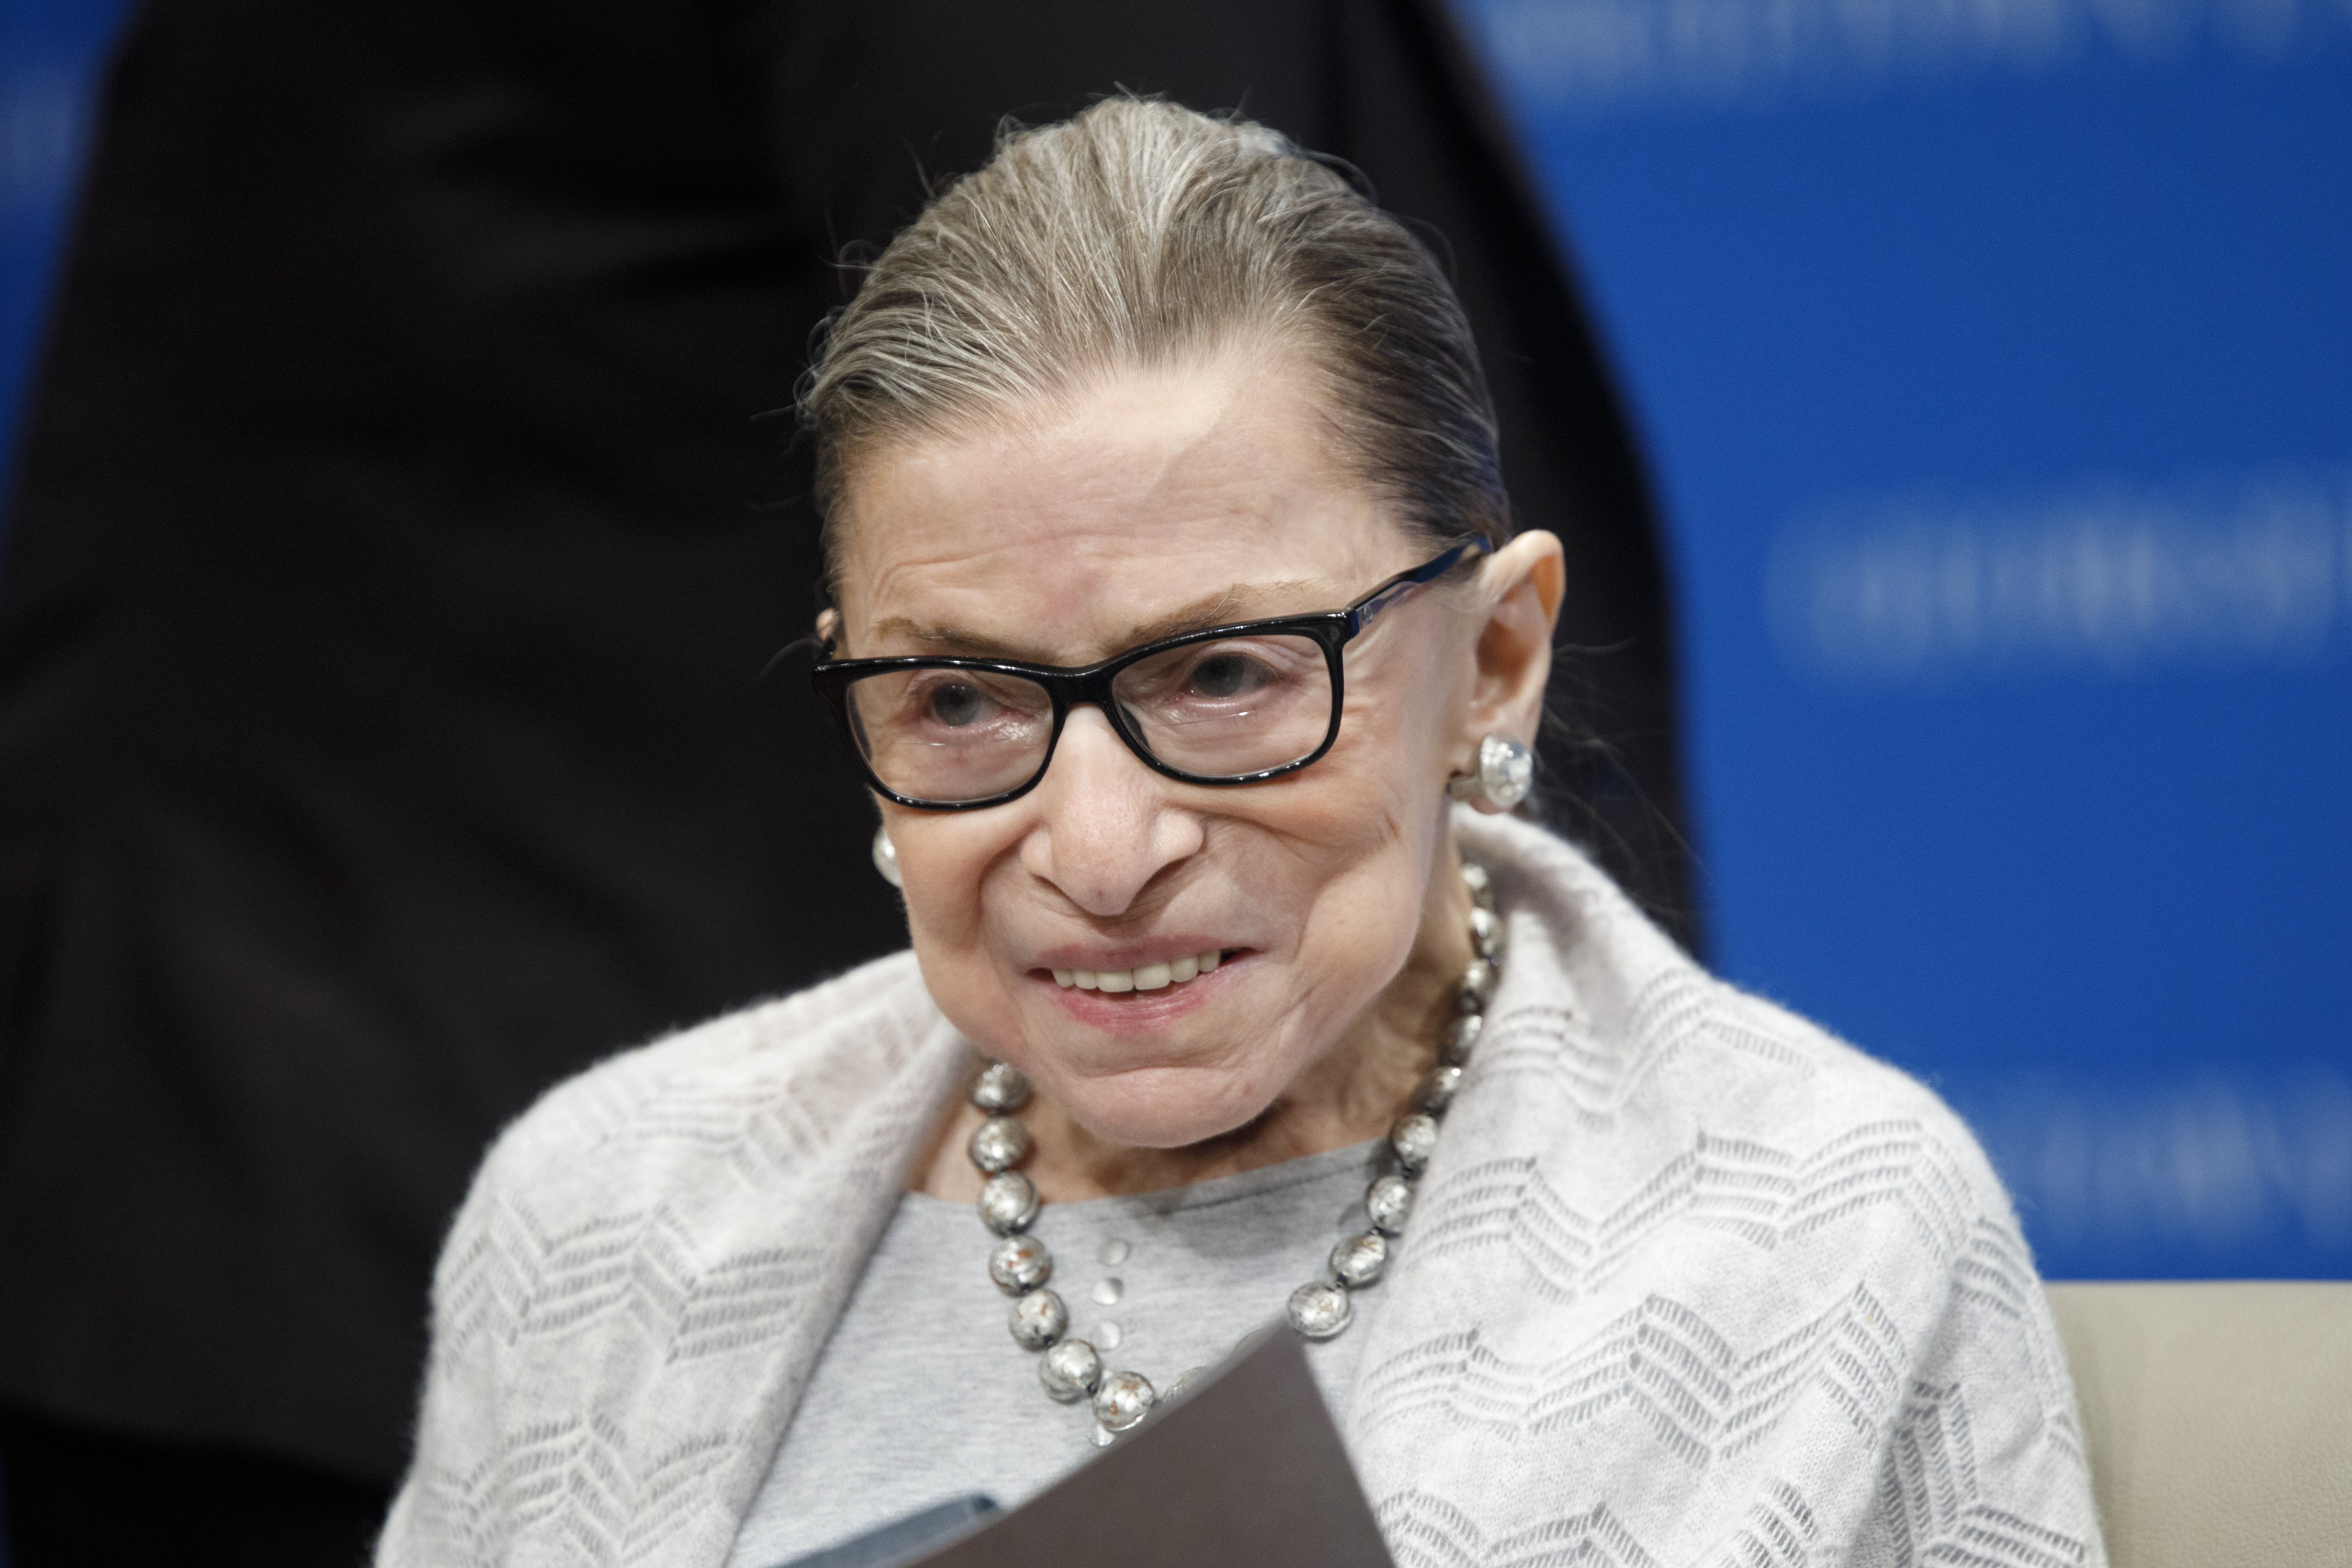 Late 87-year-od Supreme Court Justice Ruth Bader Ginsburg at the Georgetown Law Center in Washington, DC. | Photo: Tom Brenner/Getty Images